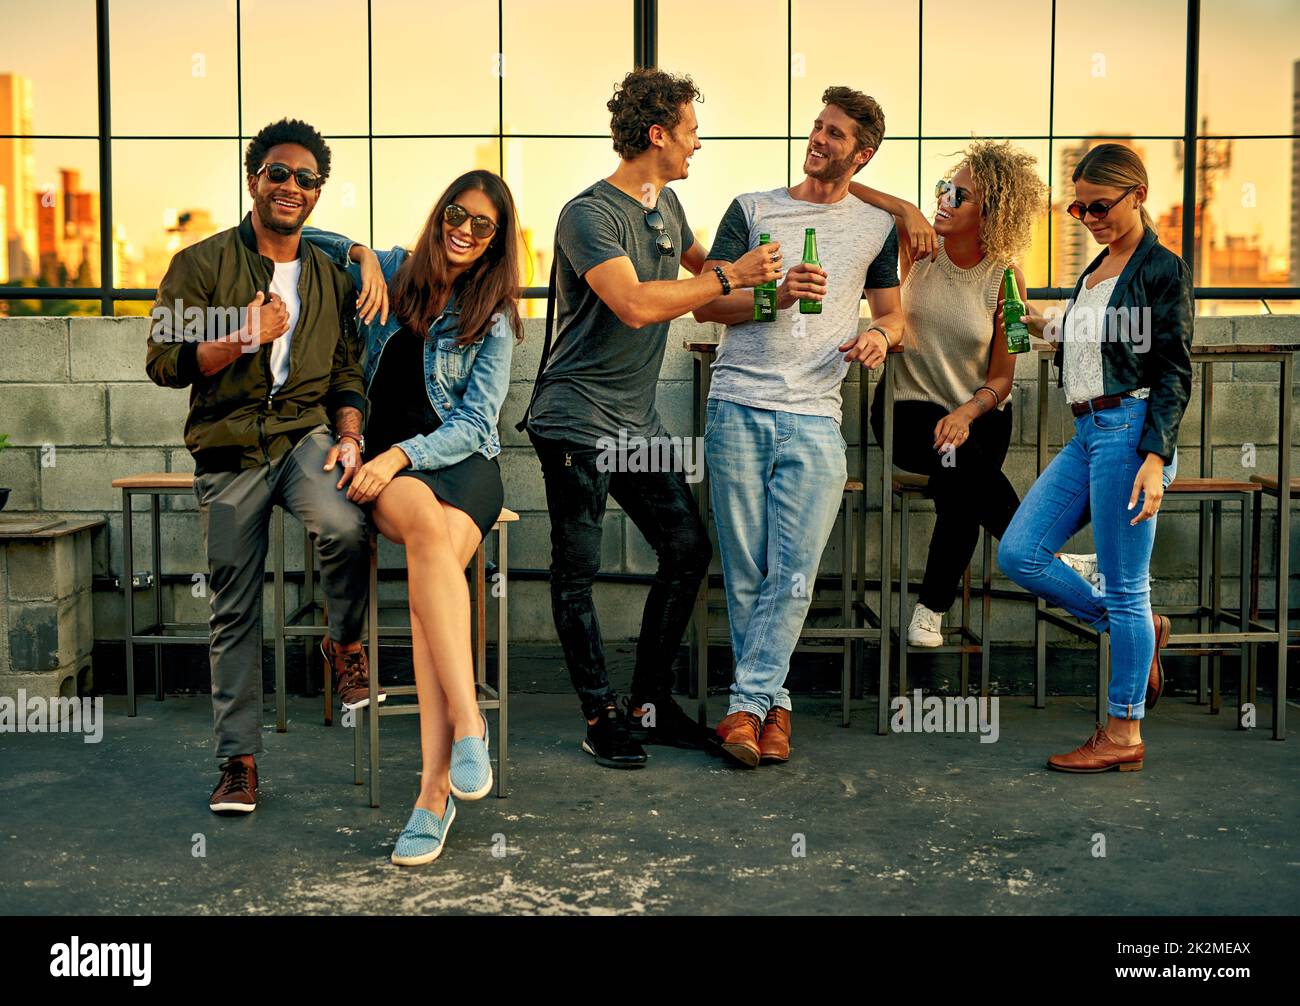 Get together and let the good times roll. Shot of a group of young friends hanging out and having drinks together outdoors. Stock Photo